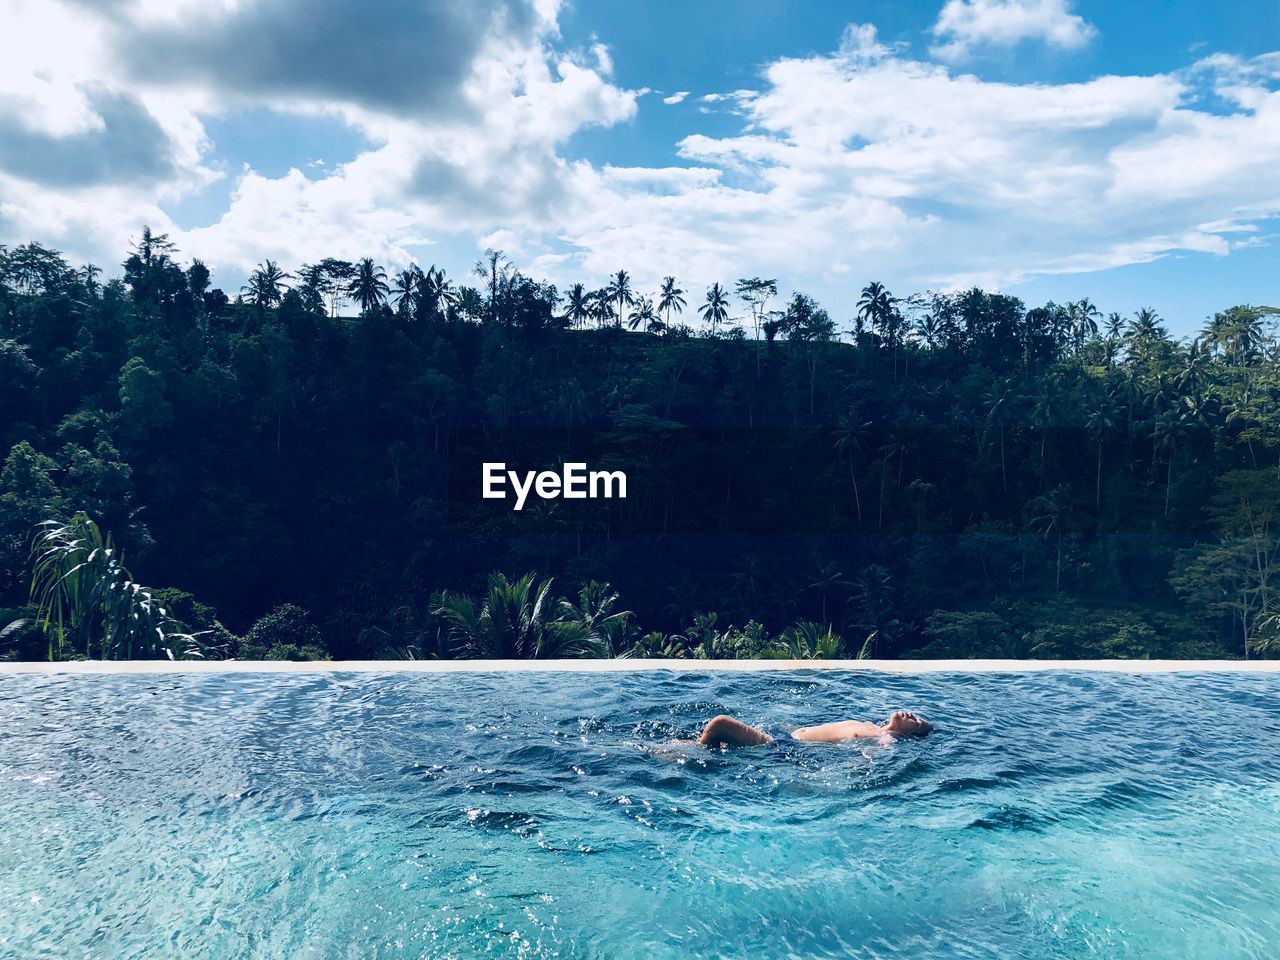 Shirtless man swimming in infinity pool against forest